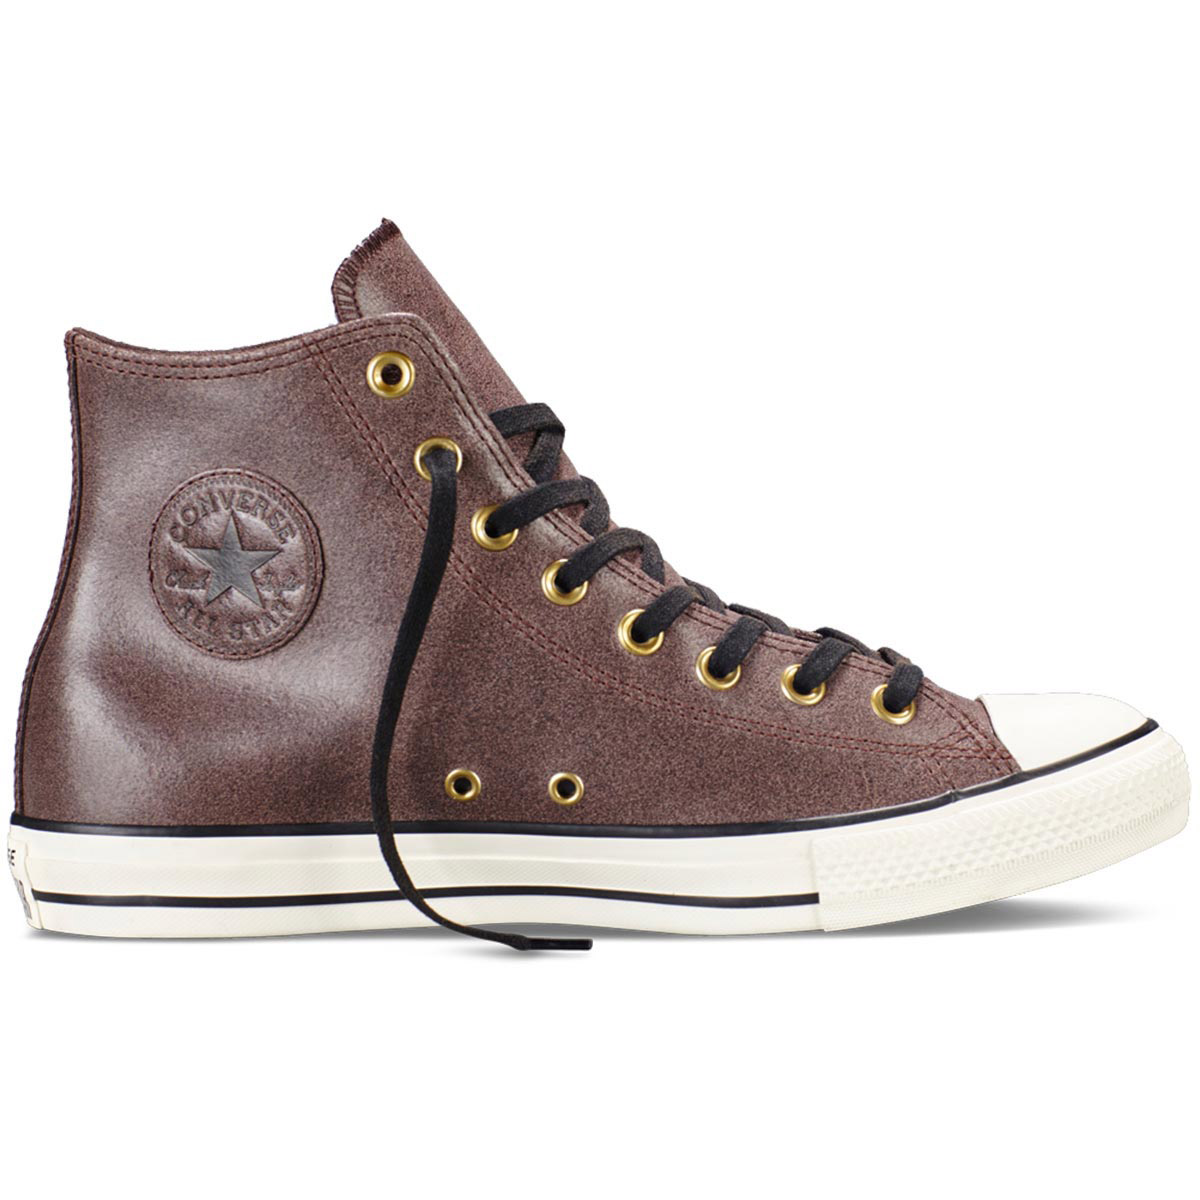 leather converse mens - 62% OFF 